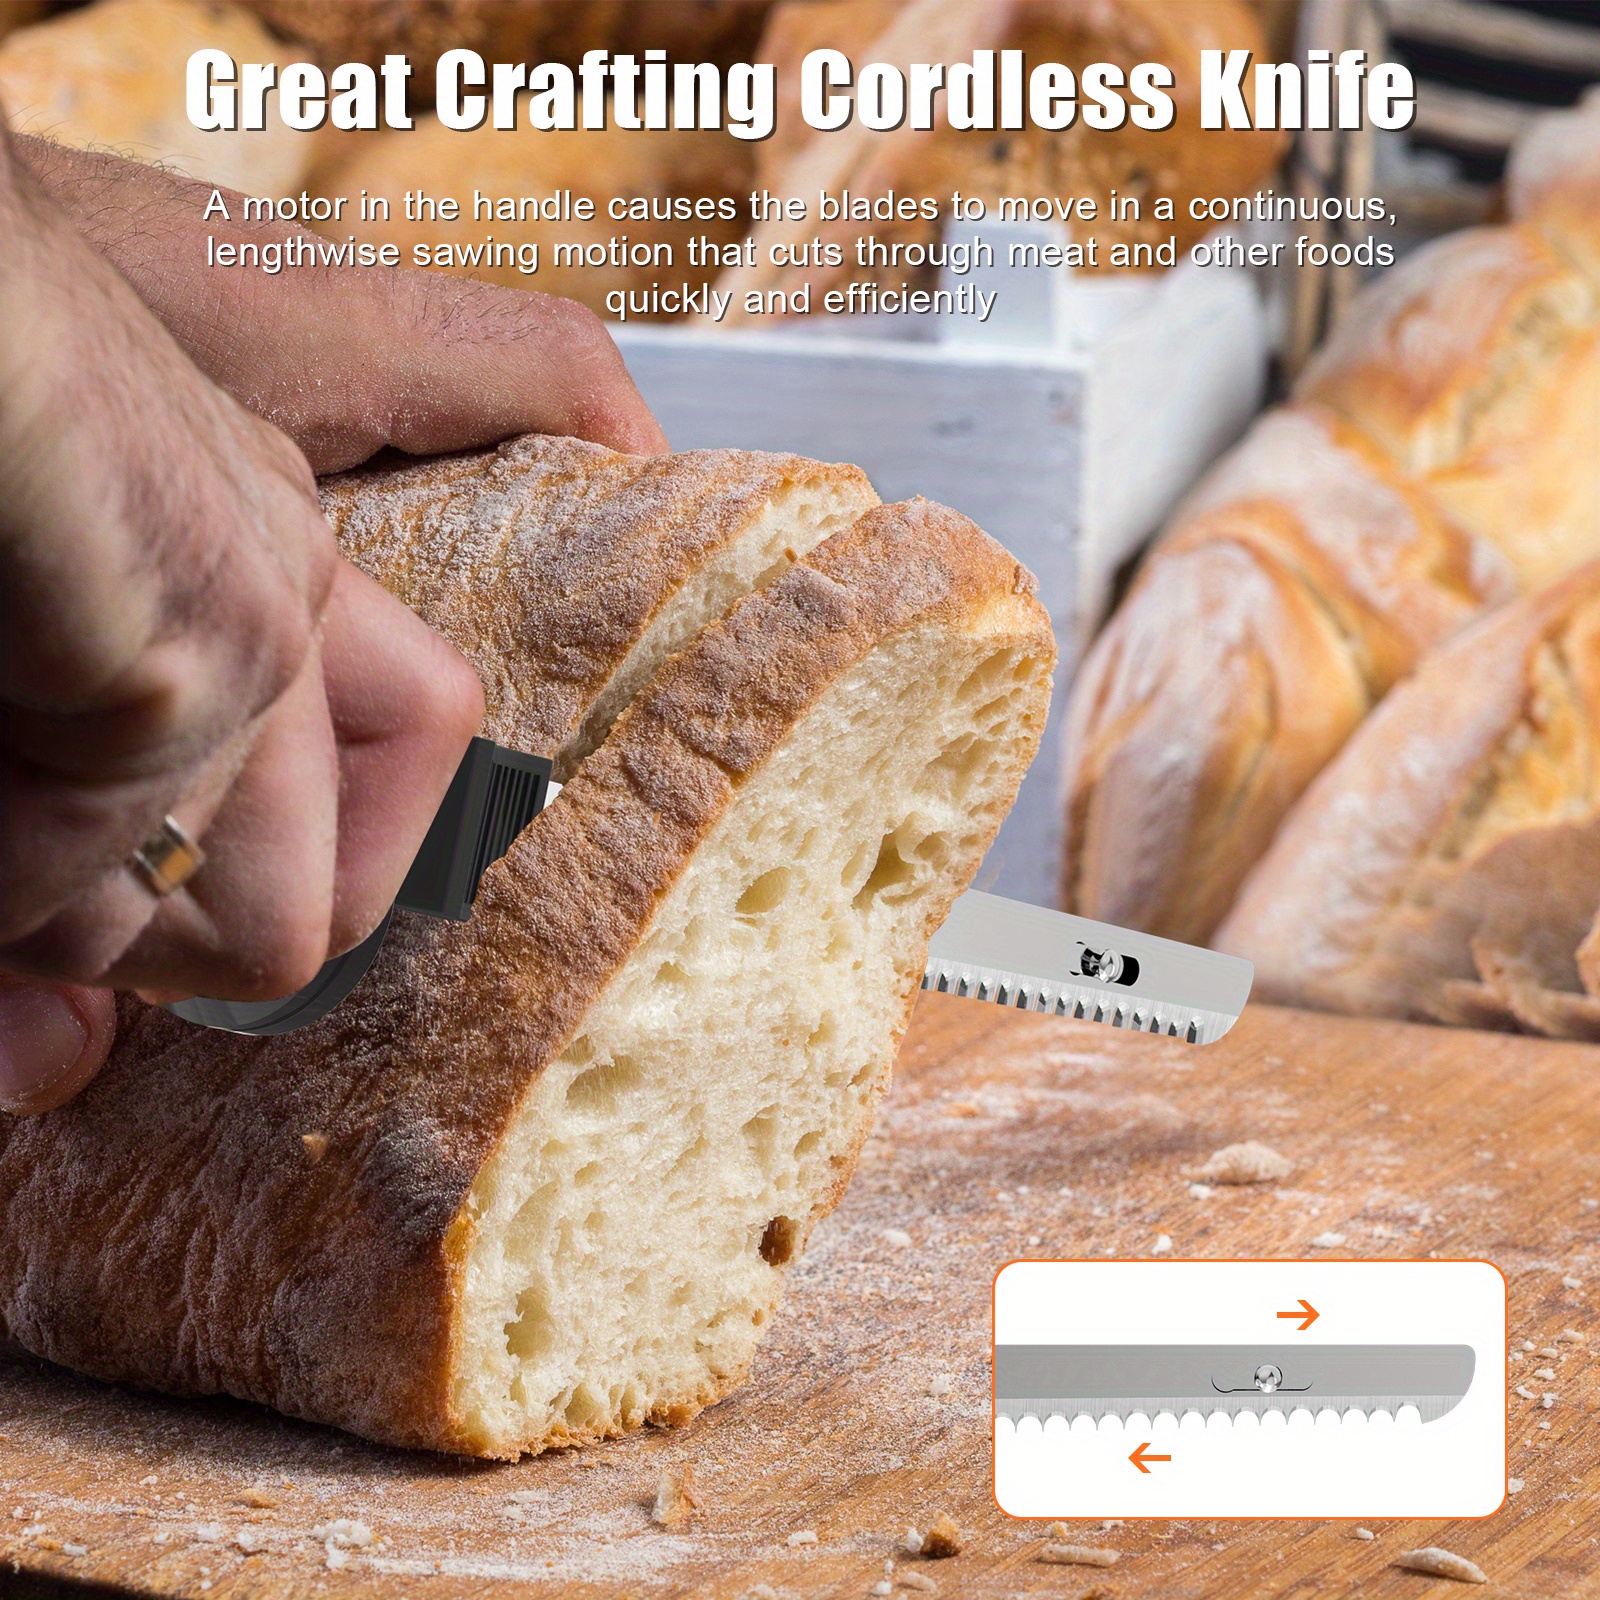 ENERTWIST Cordless Electric Carving Knife 1S Quick Start One-Hand Operation  Easy to Use with Safety Lock Button for Carving Bread,Turkey